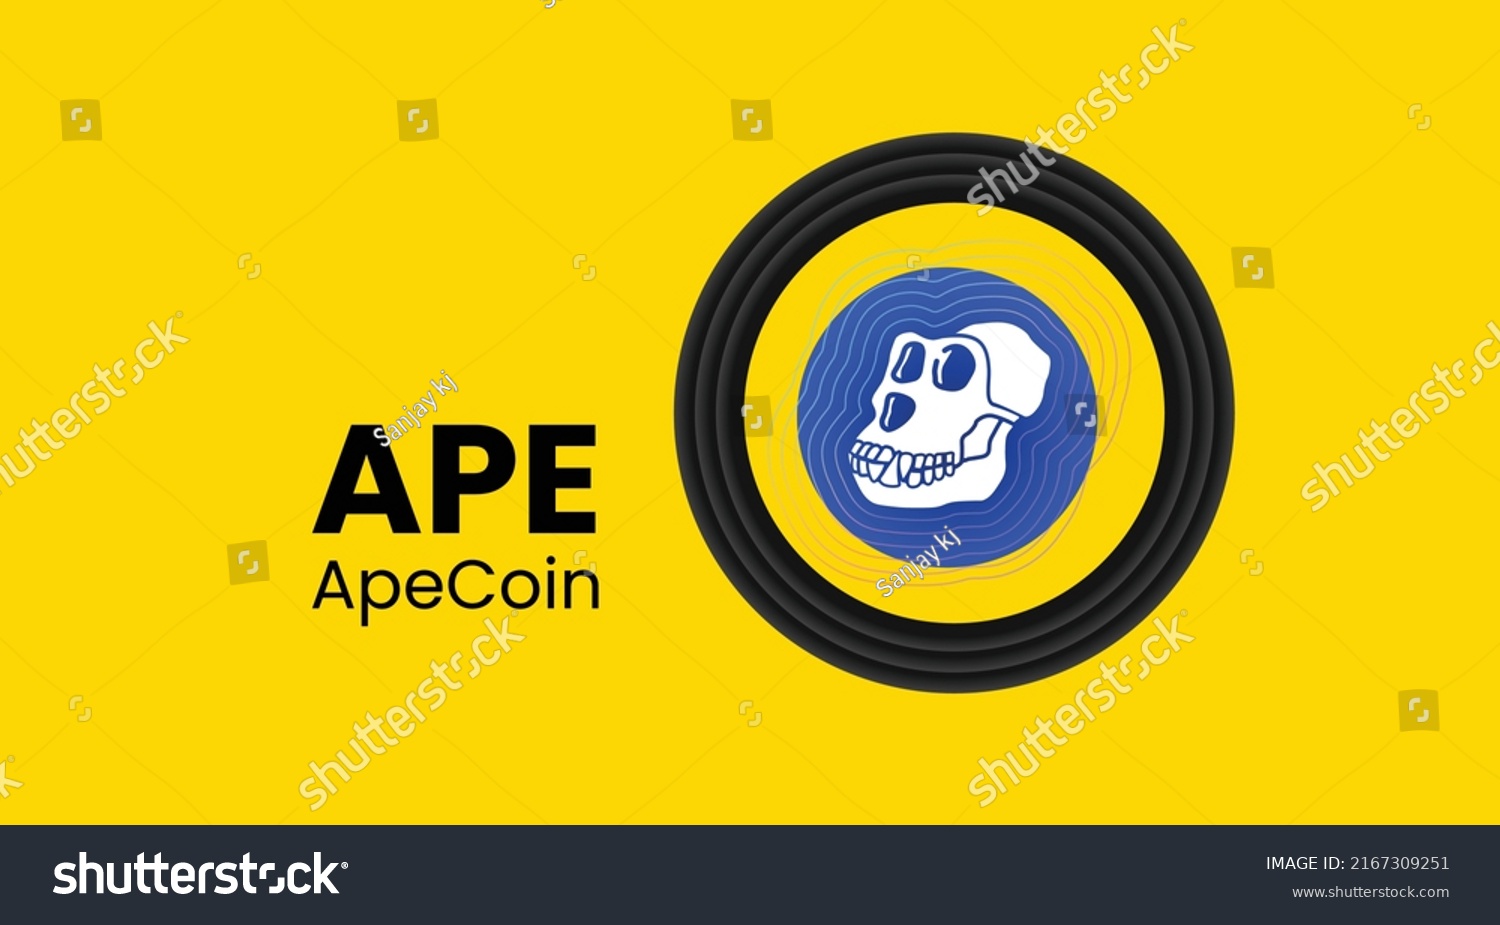 SVG of Vector illustration of Apecoin, APE crypto currency logo on yellow background with copy space. Apecoin, APE cryptocurrency token logo or symbol banner. svg